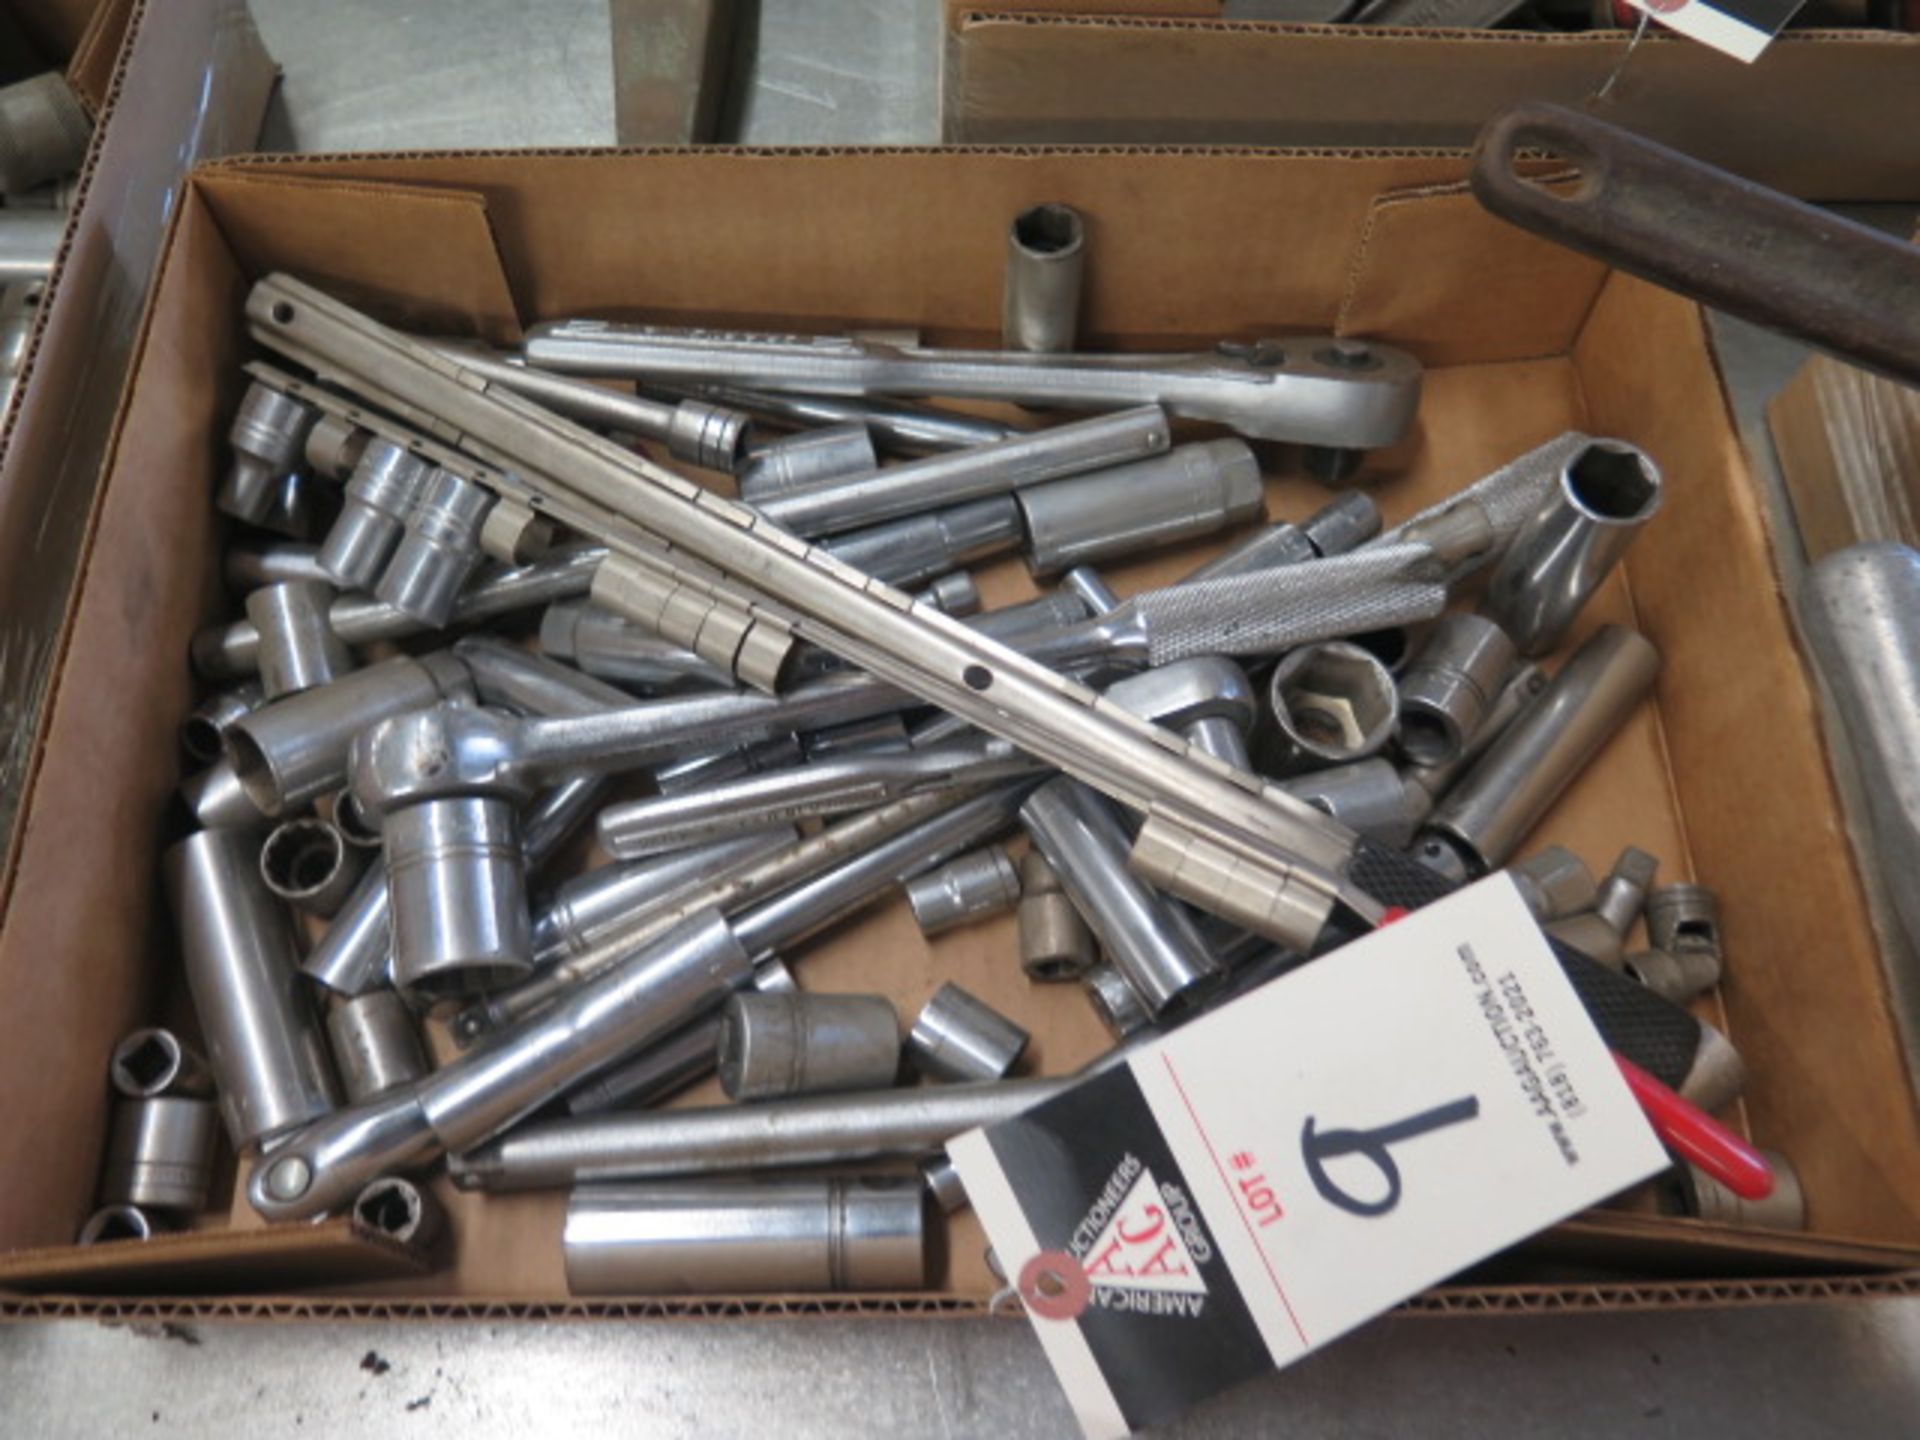 Craftsman Socket Wrenches